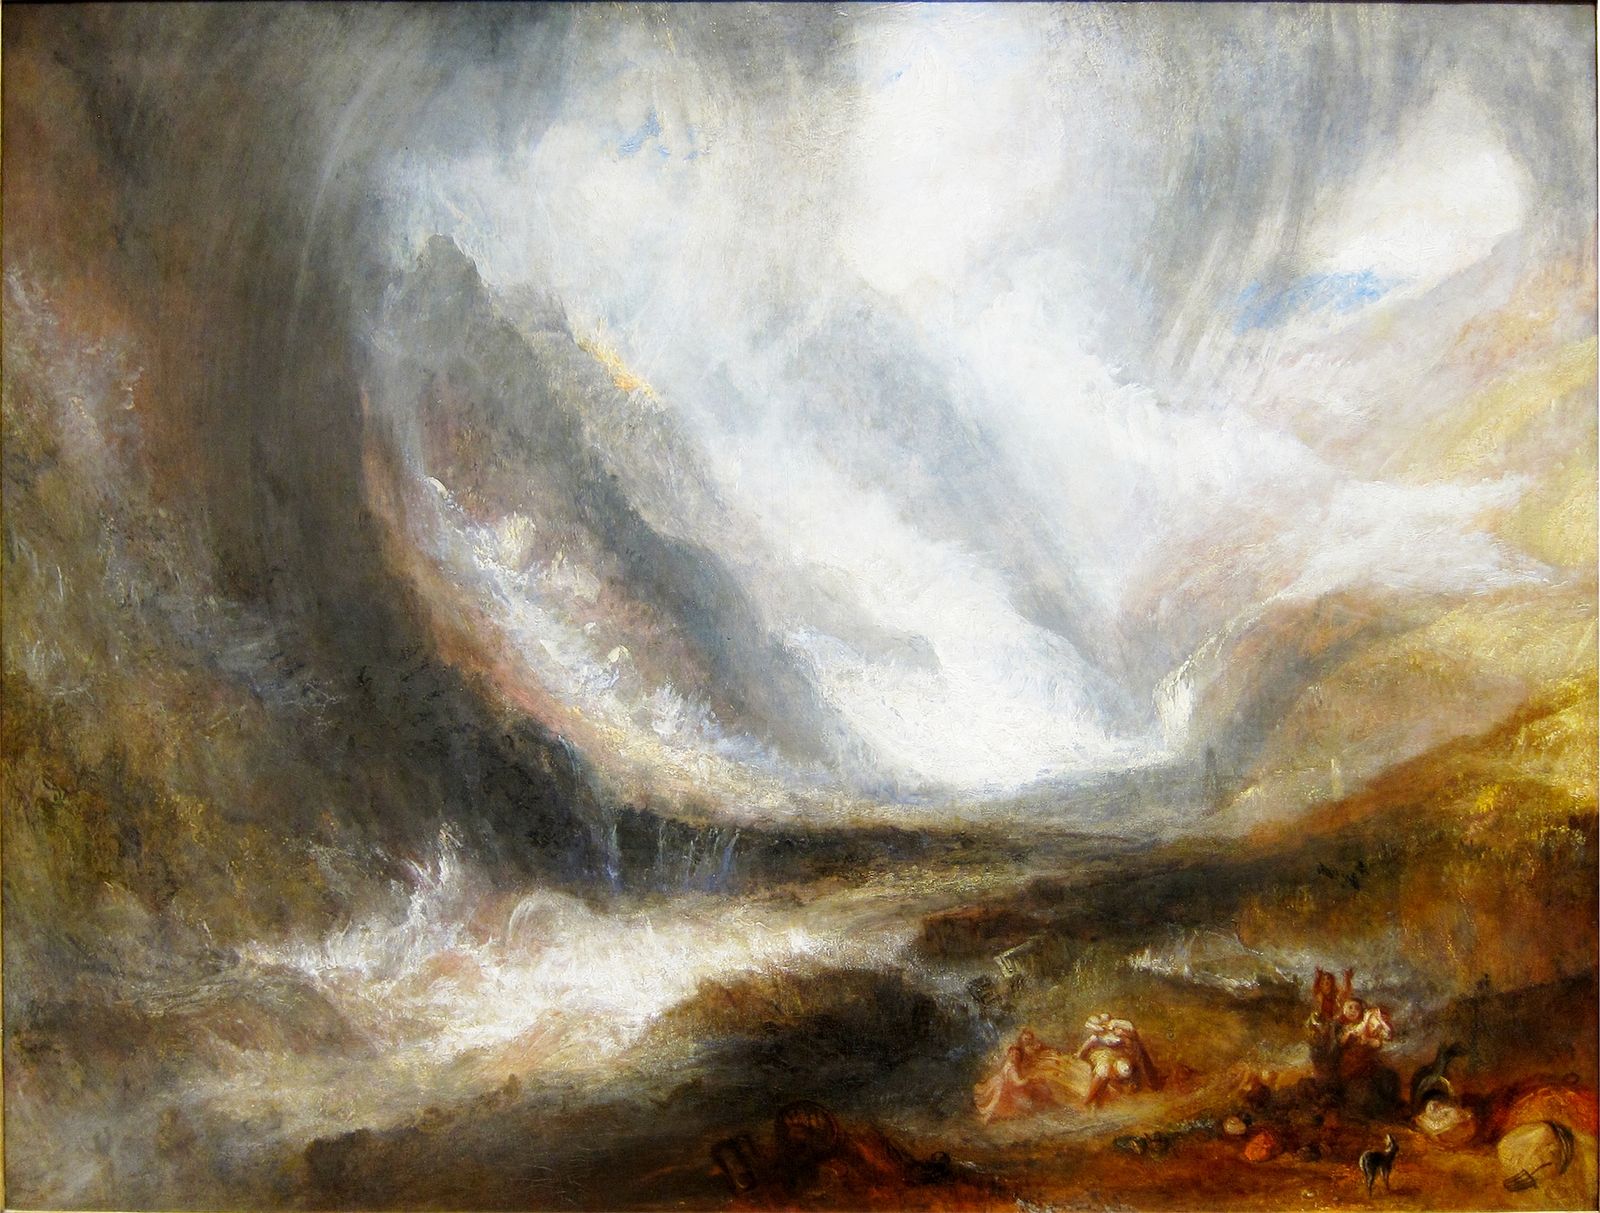 Where to See the Work of Mr. Turner Around America, Arts & Culture